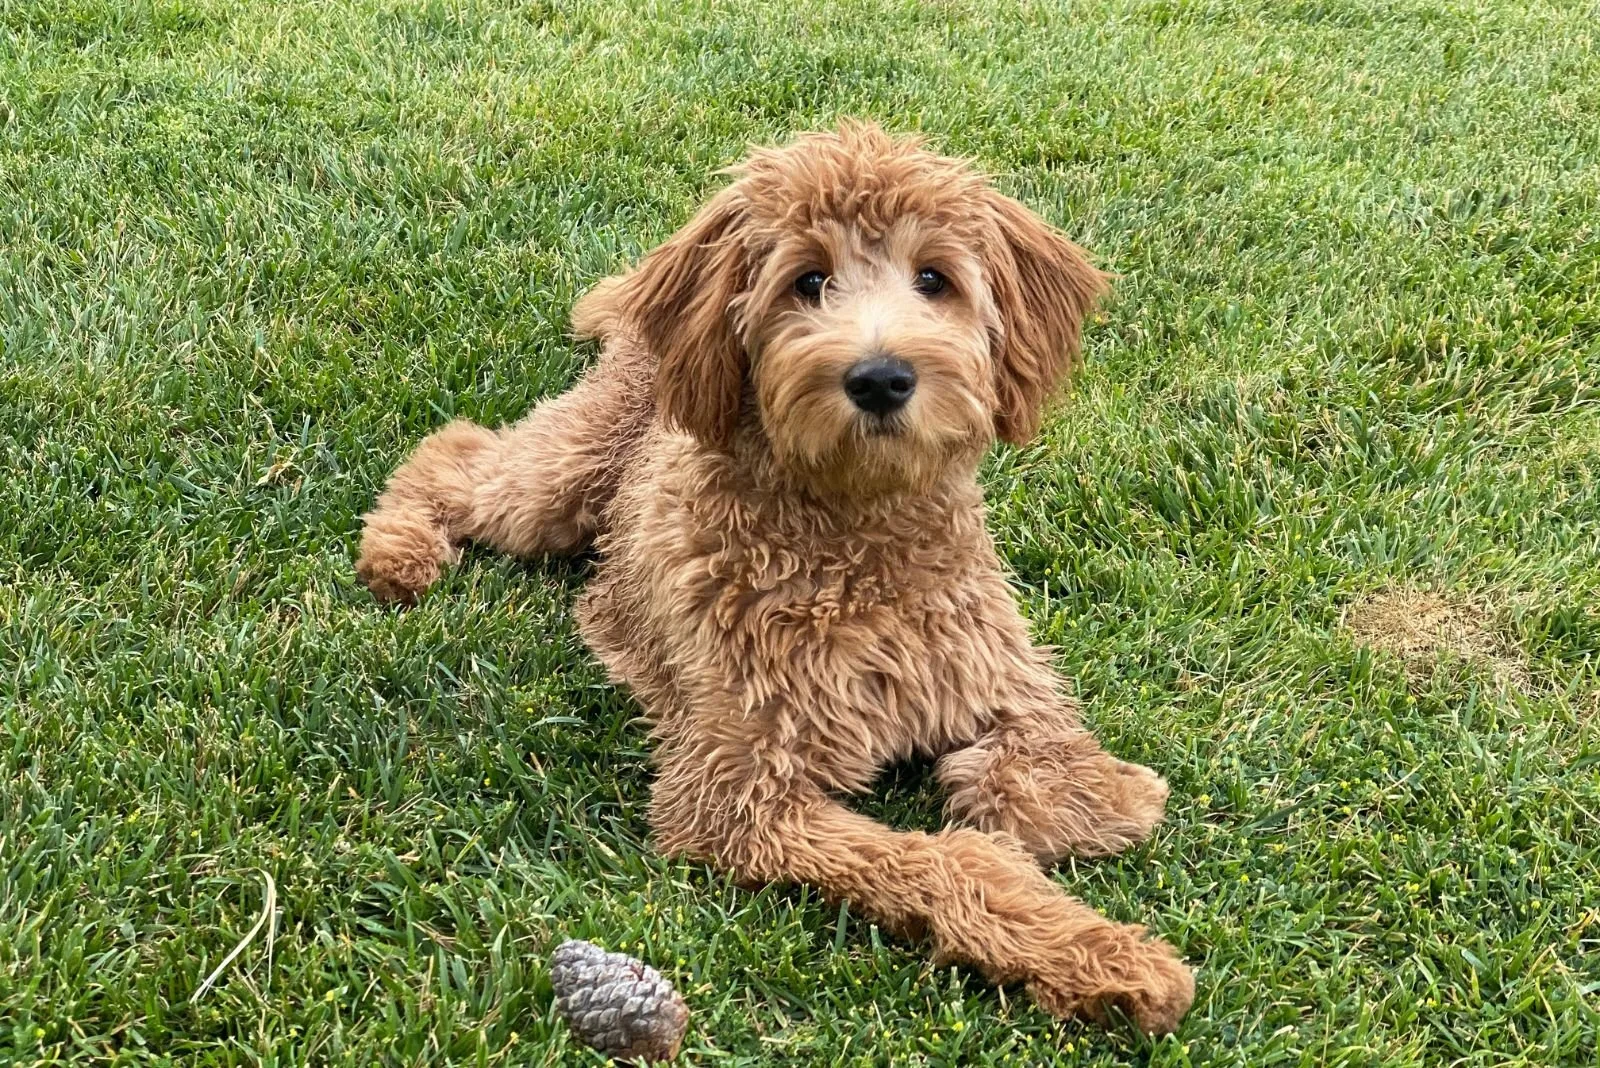 F2B Goldendoodle is lying on the grass